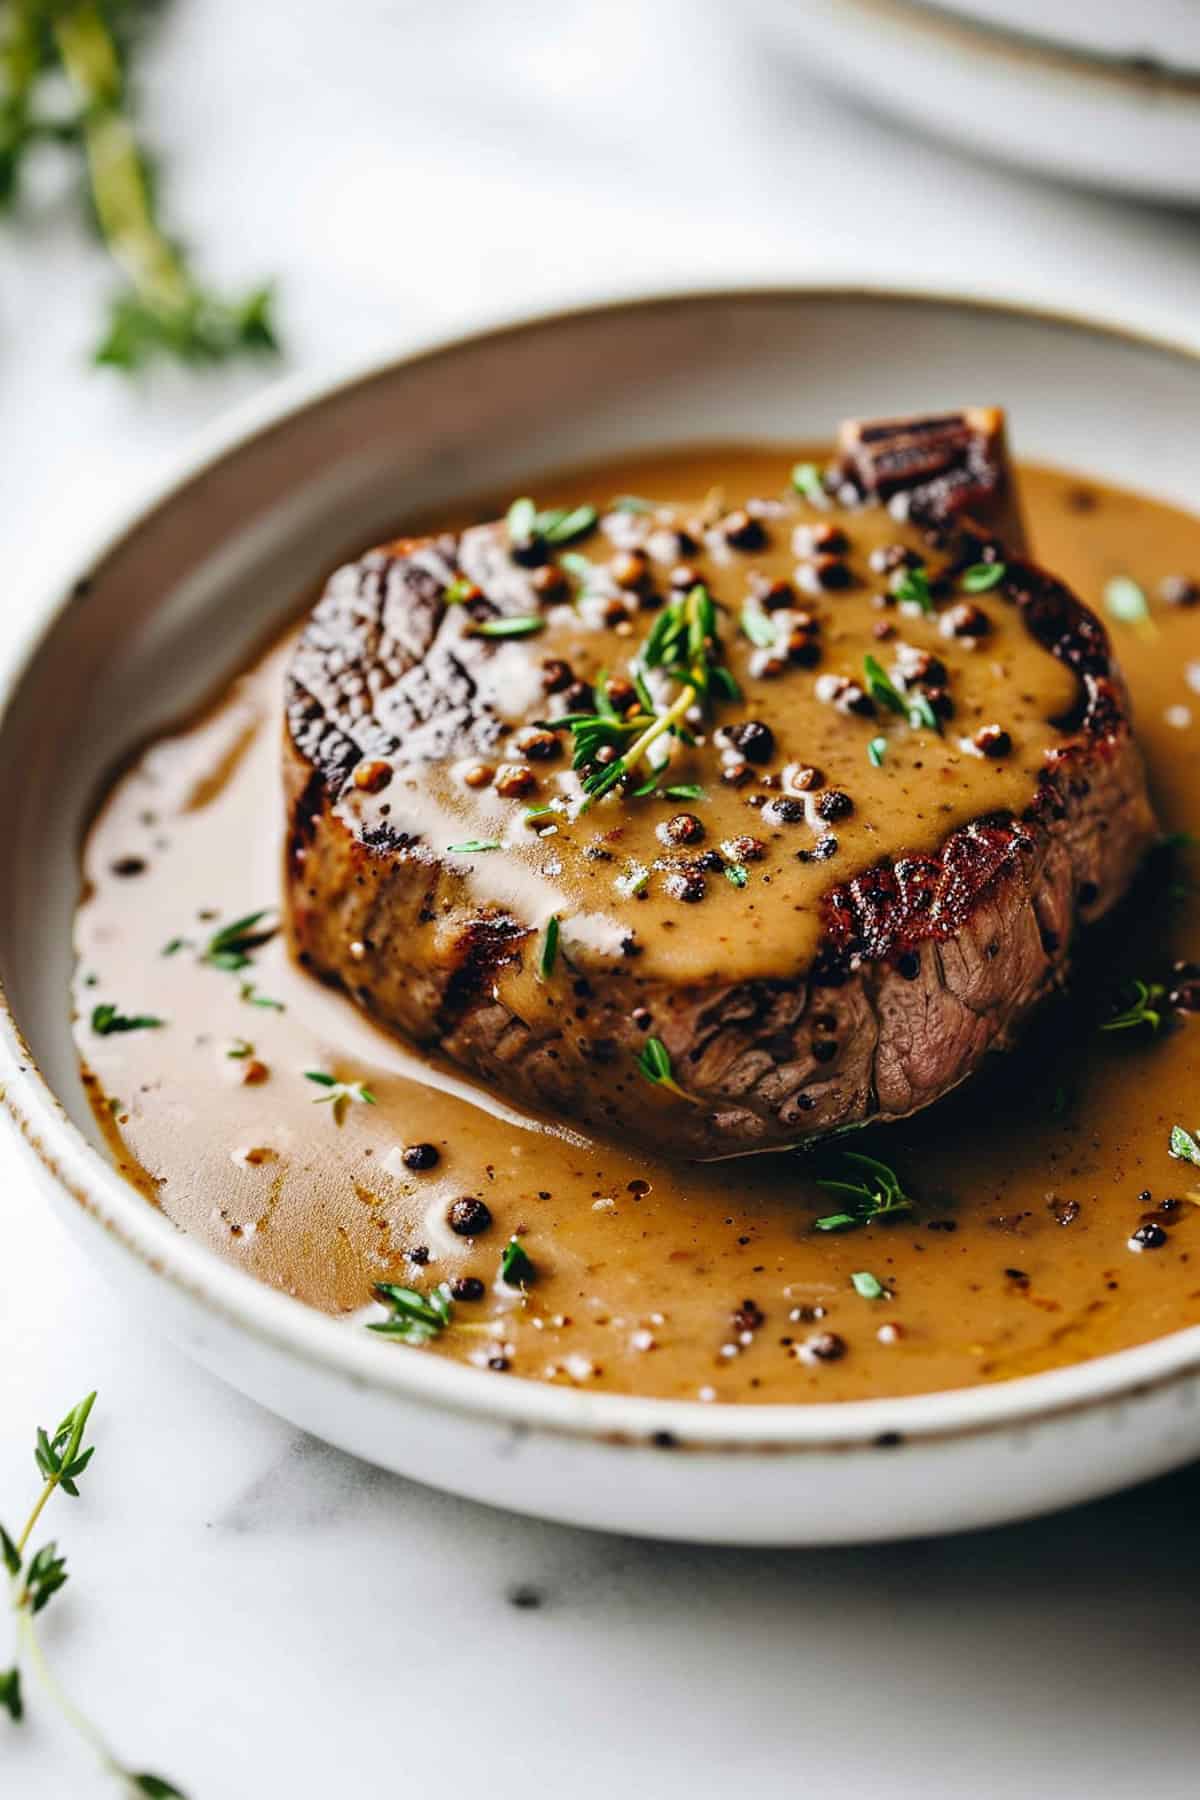 Seared sirloin steak with whisky peppercorn sauce in a white dish.